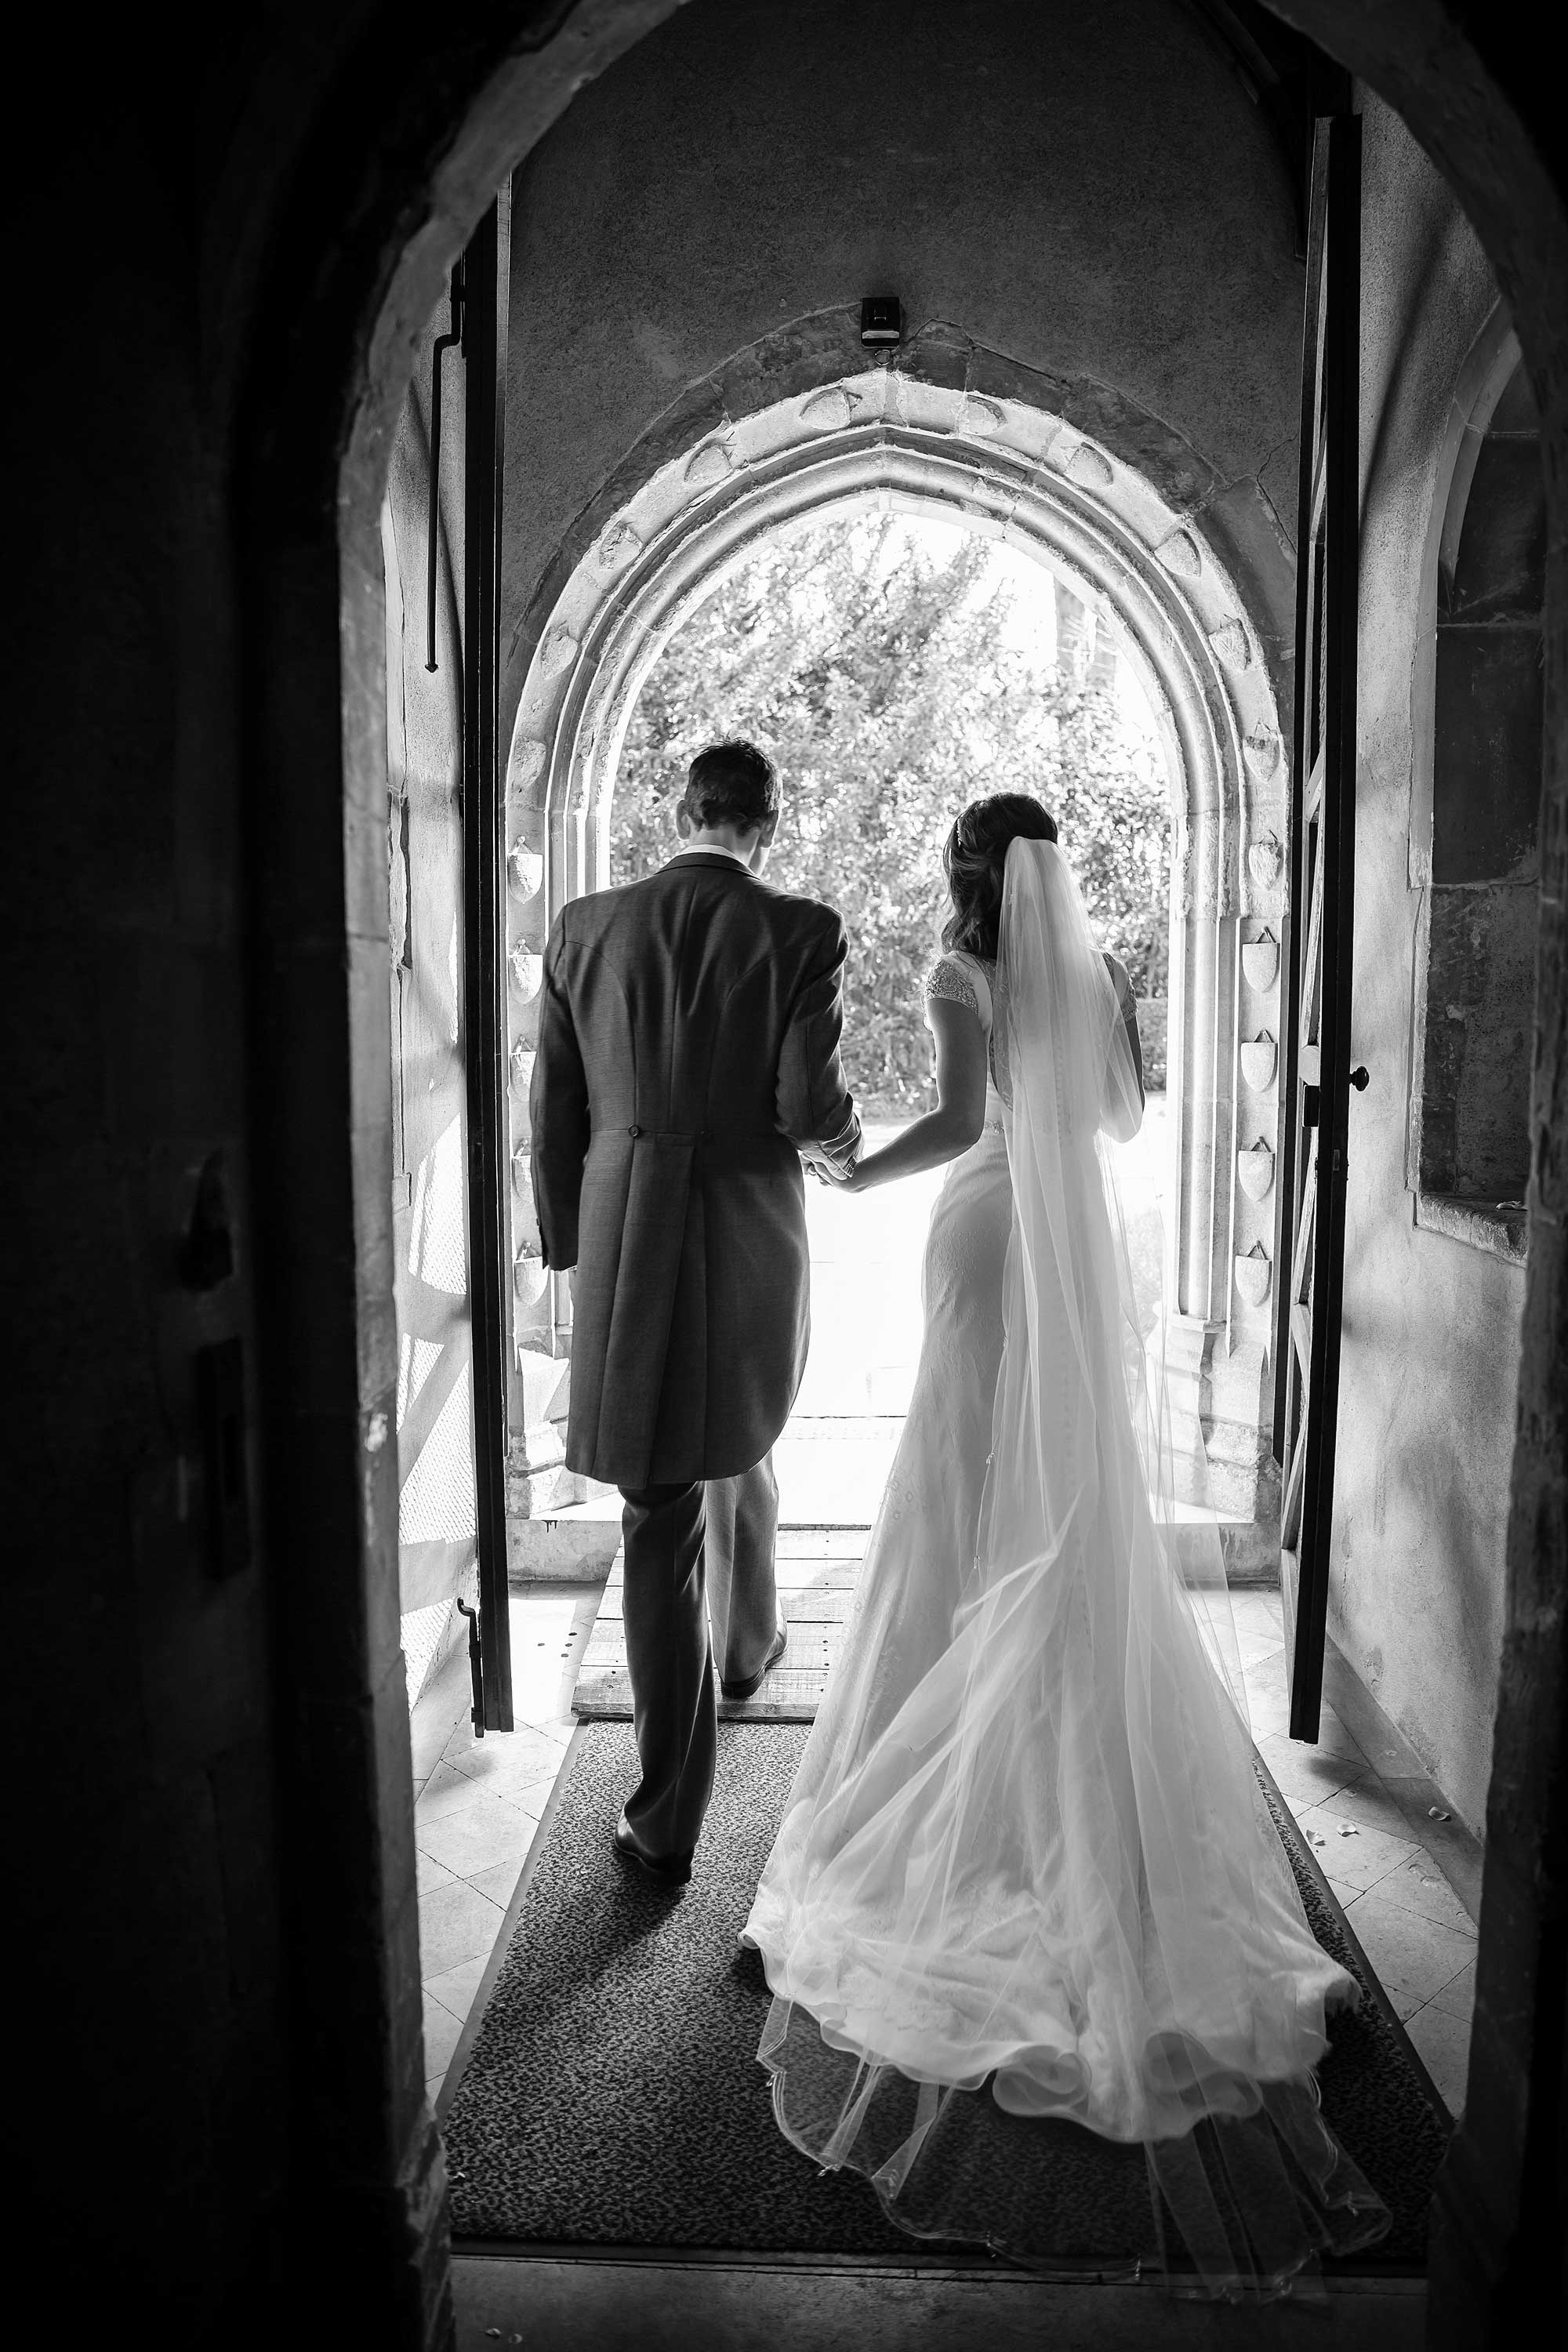 Black and white image of the couple exiting the church taken from behind them, so you can see the back of the brides dress.